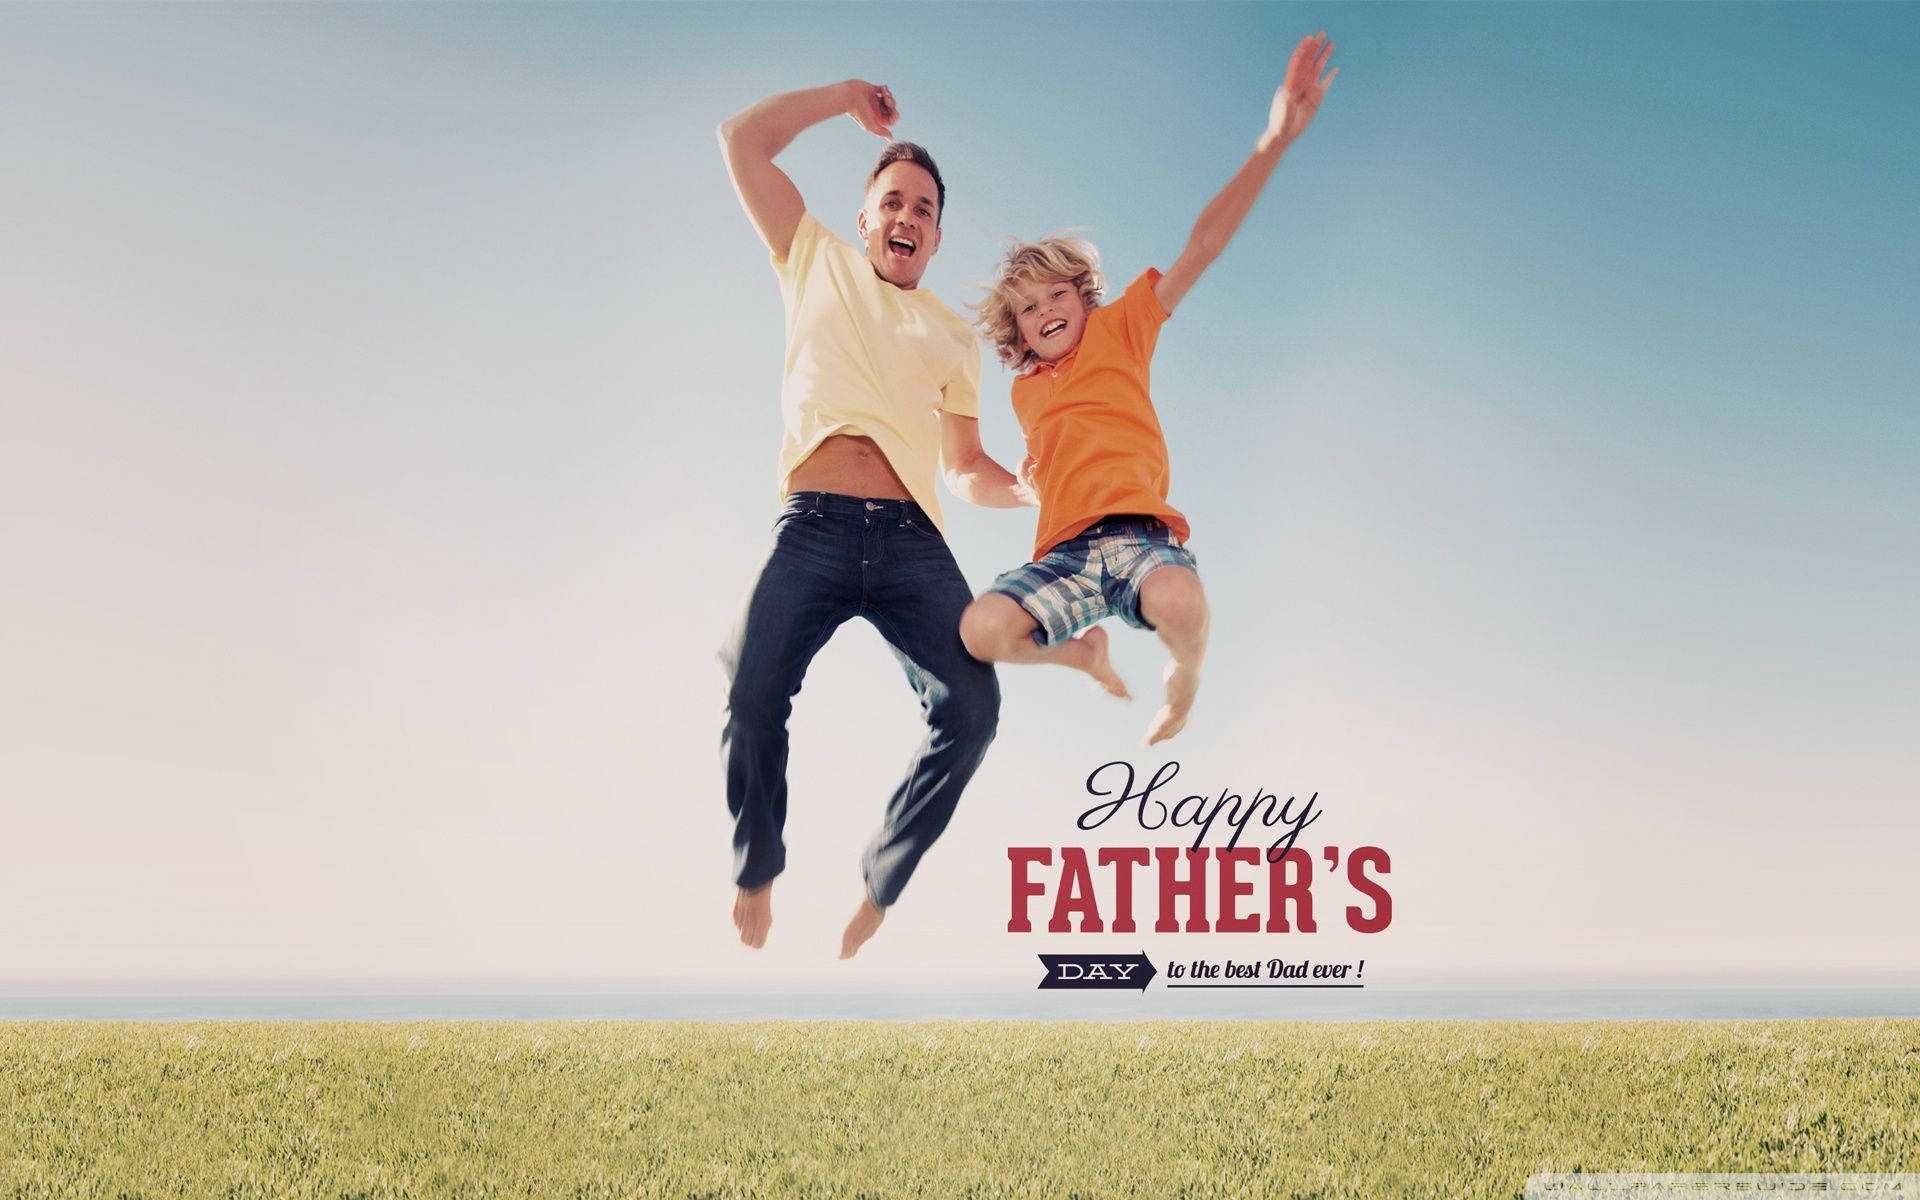 Celebrate Father's Day in the warm sun! Wallpaper